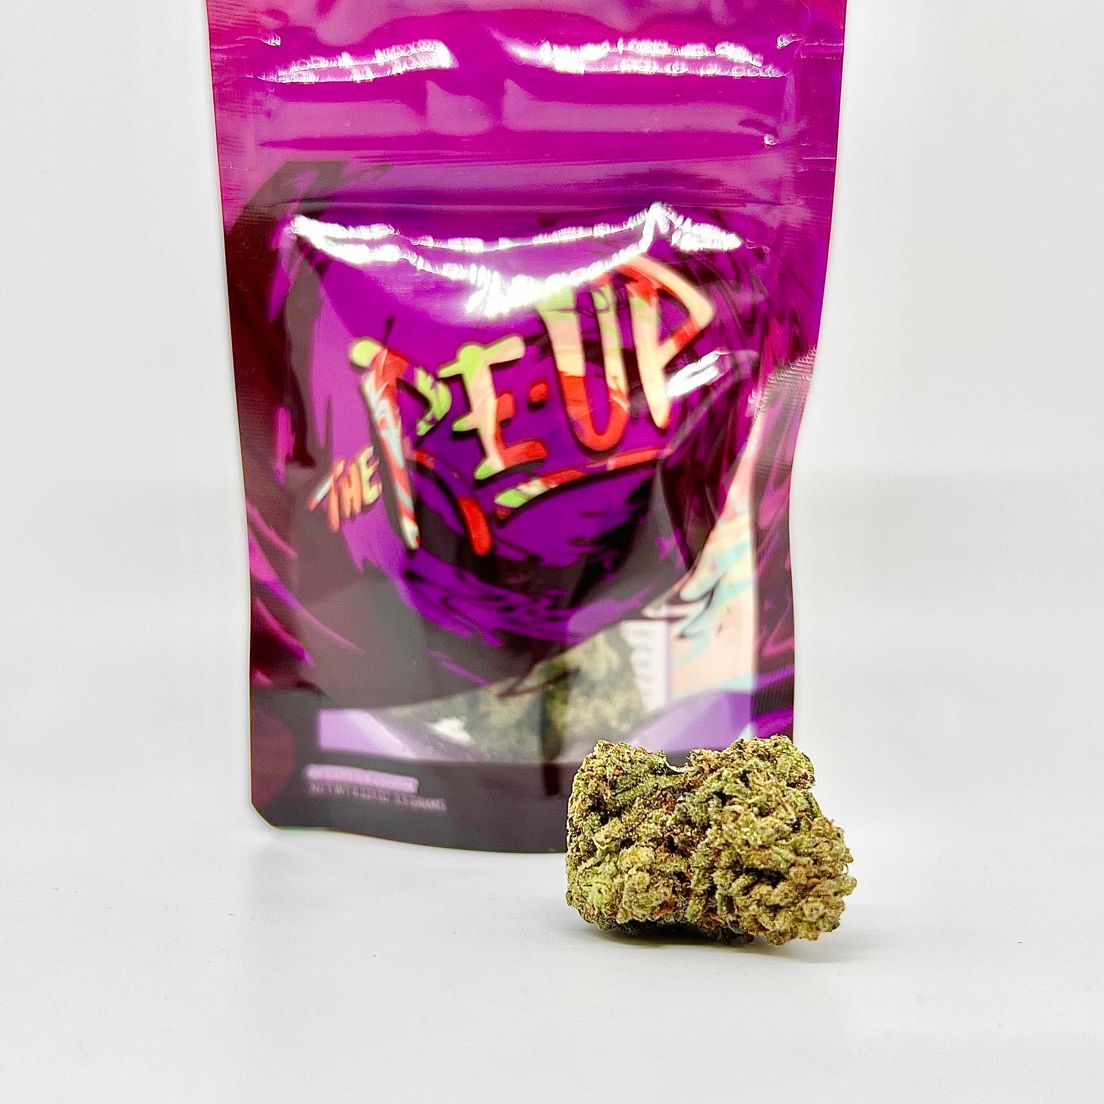 *BLOWOUT DEAL! $25 1/8 Apple Fritters (30.2%/Hybrid) - The Re-Up *Disclaimer*